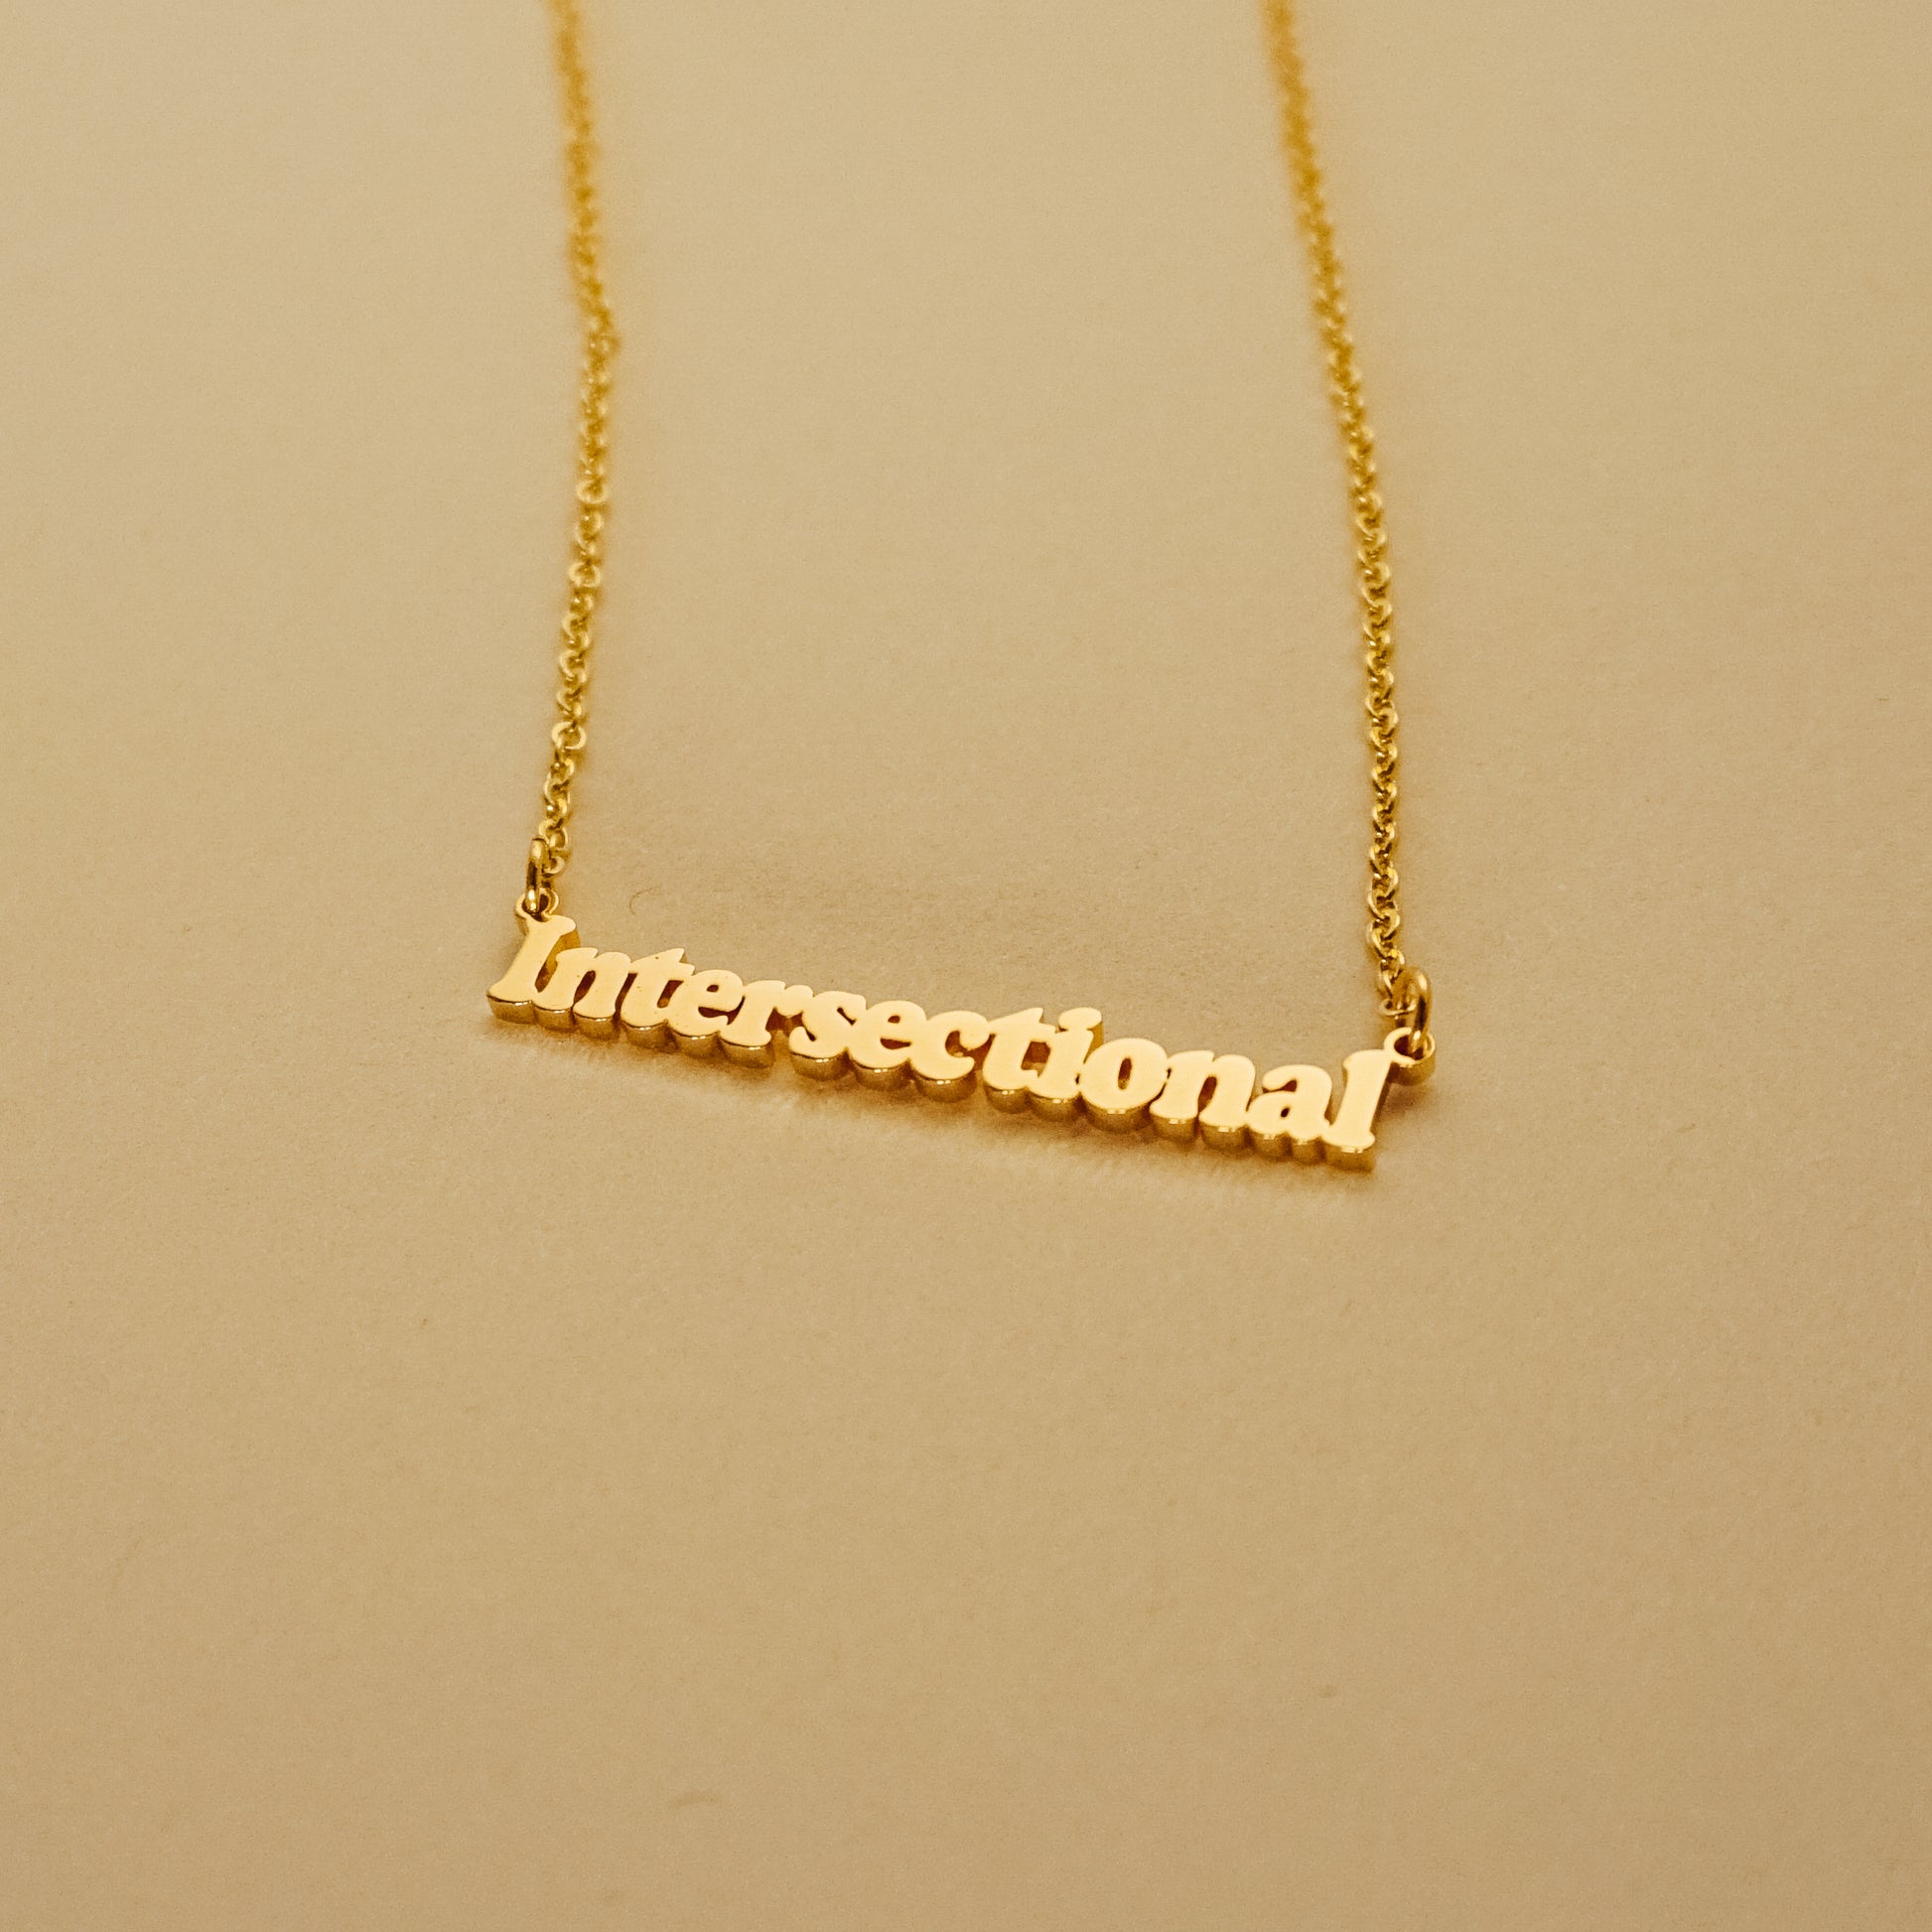 "Intersectional" Feminism 18K Gold Plated Necklace - Brownie Points for You